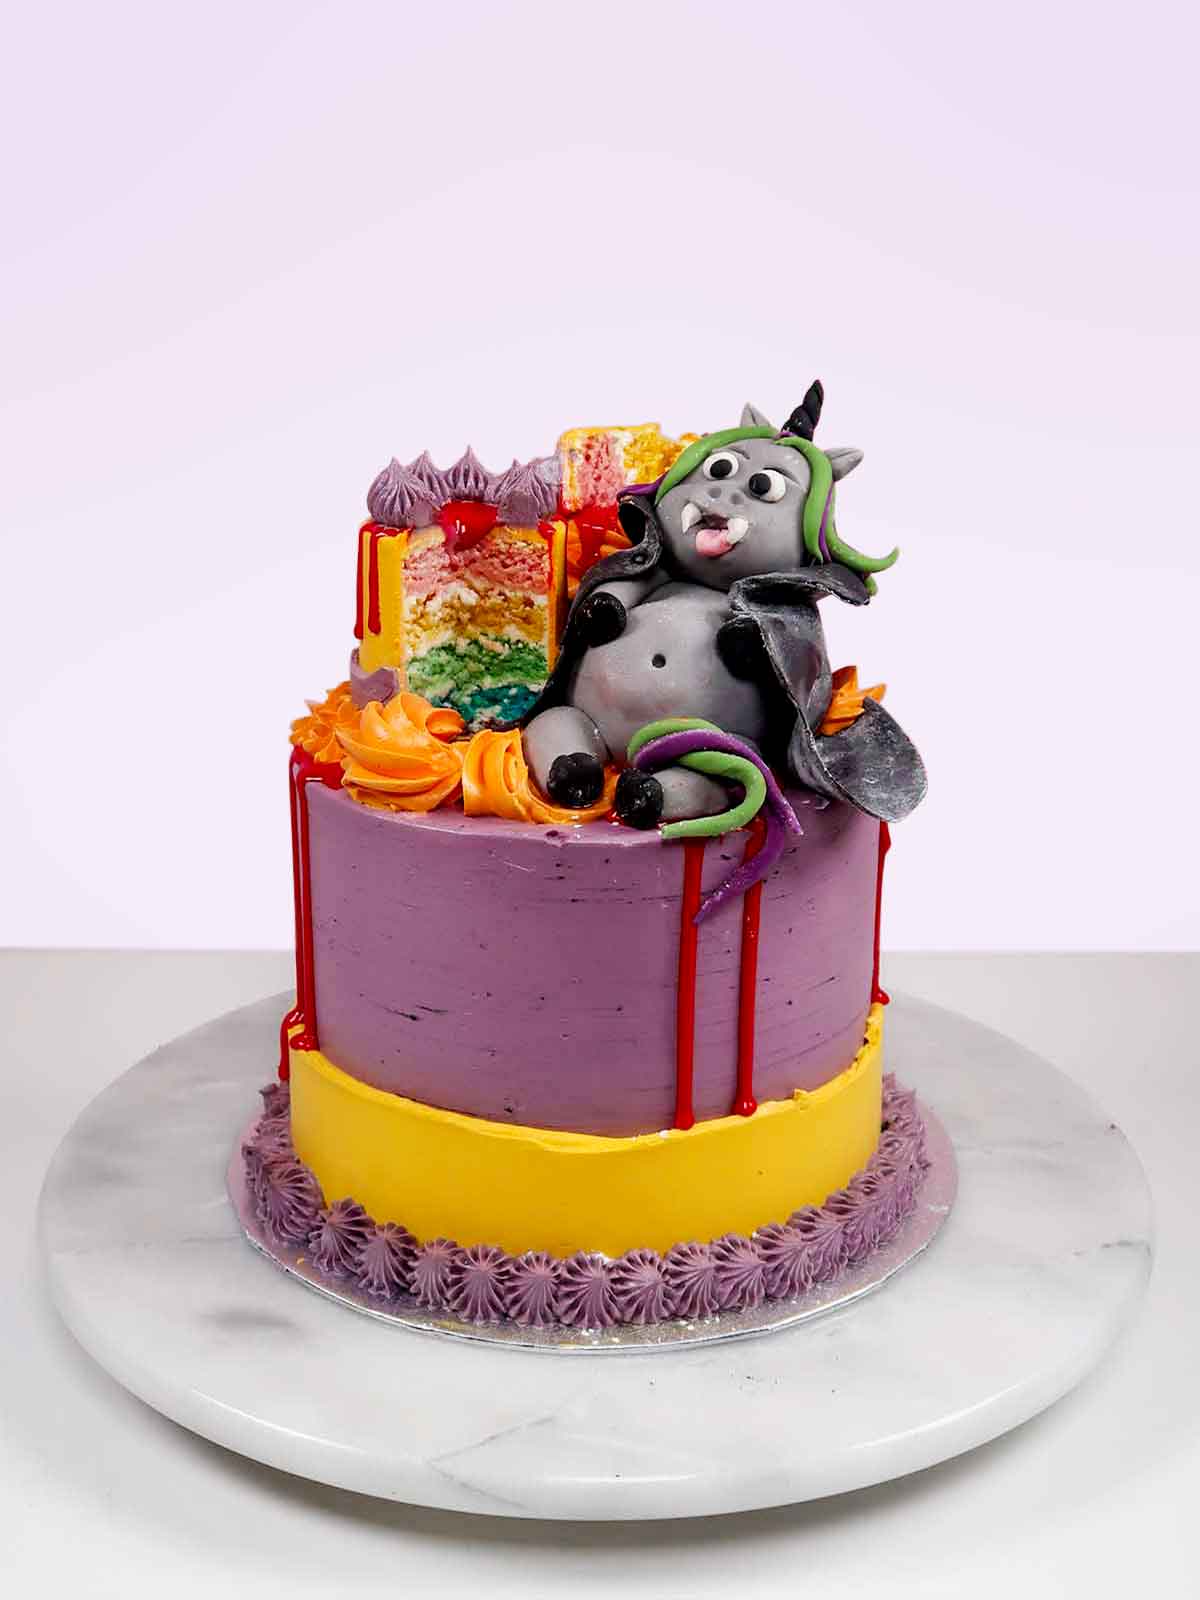 Special Unique Happy Birthday Cake HD Pics Images For Friend